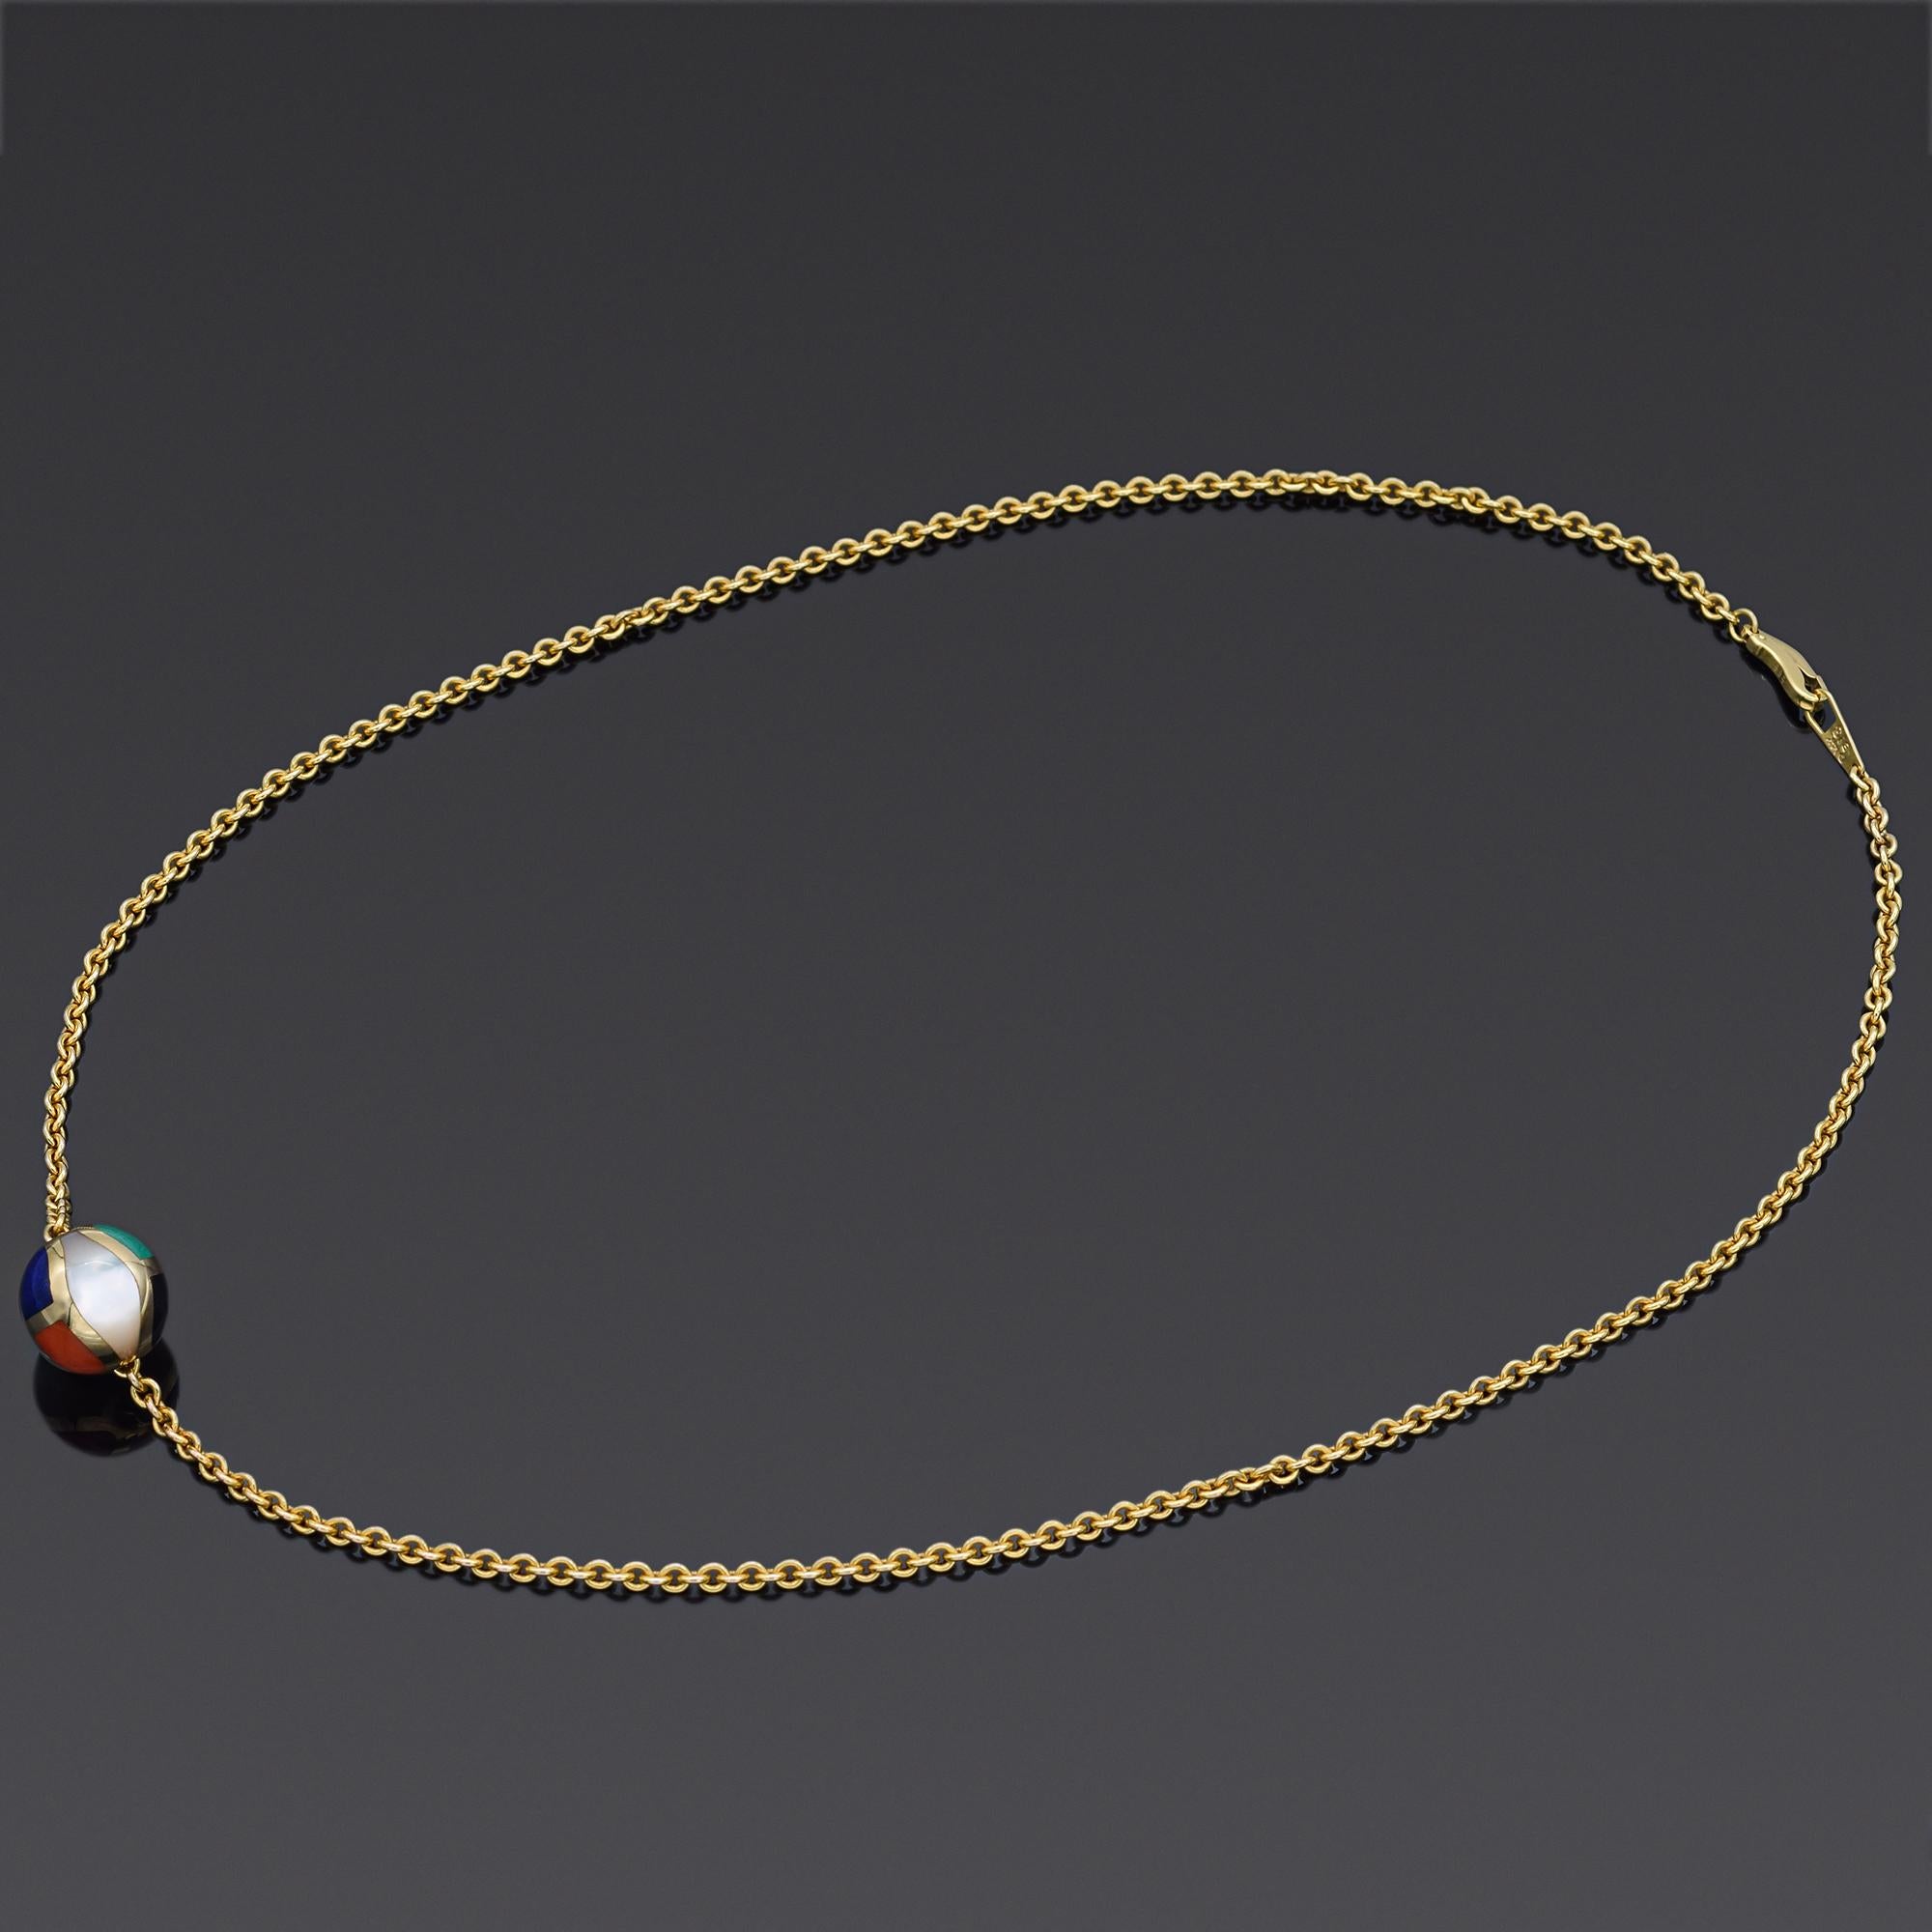 Weight: 10.3 Grams
Stone: Mother of Pearl, malachite, lapis, onyx, coral, purple jasper
Pendant: 12 mm
Chain: 16.5 Inches
Hallmark: AG 14K

ITEM #: BR-1061-092823-10